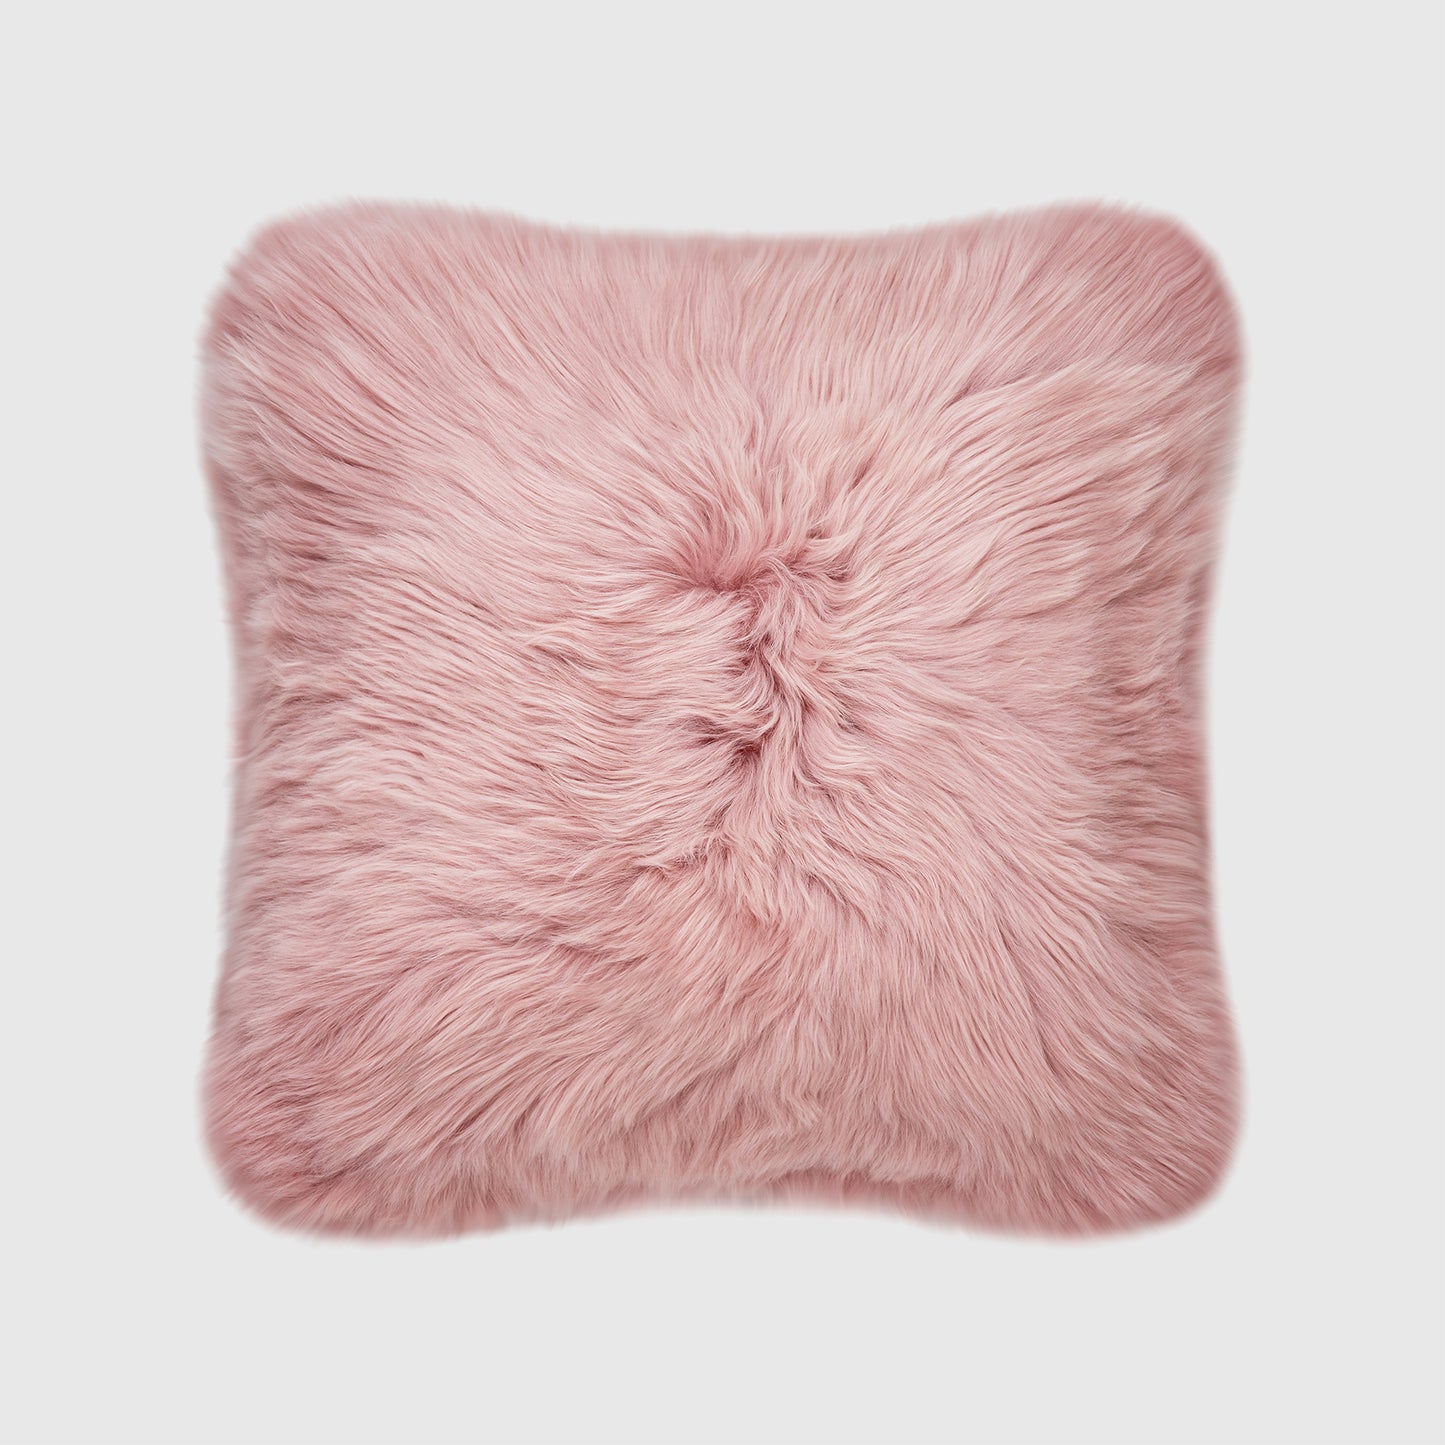 The Mood | Charlie Sheepskin Double-sided 18"x18" Pillow, Rosa